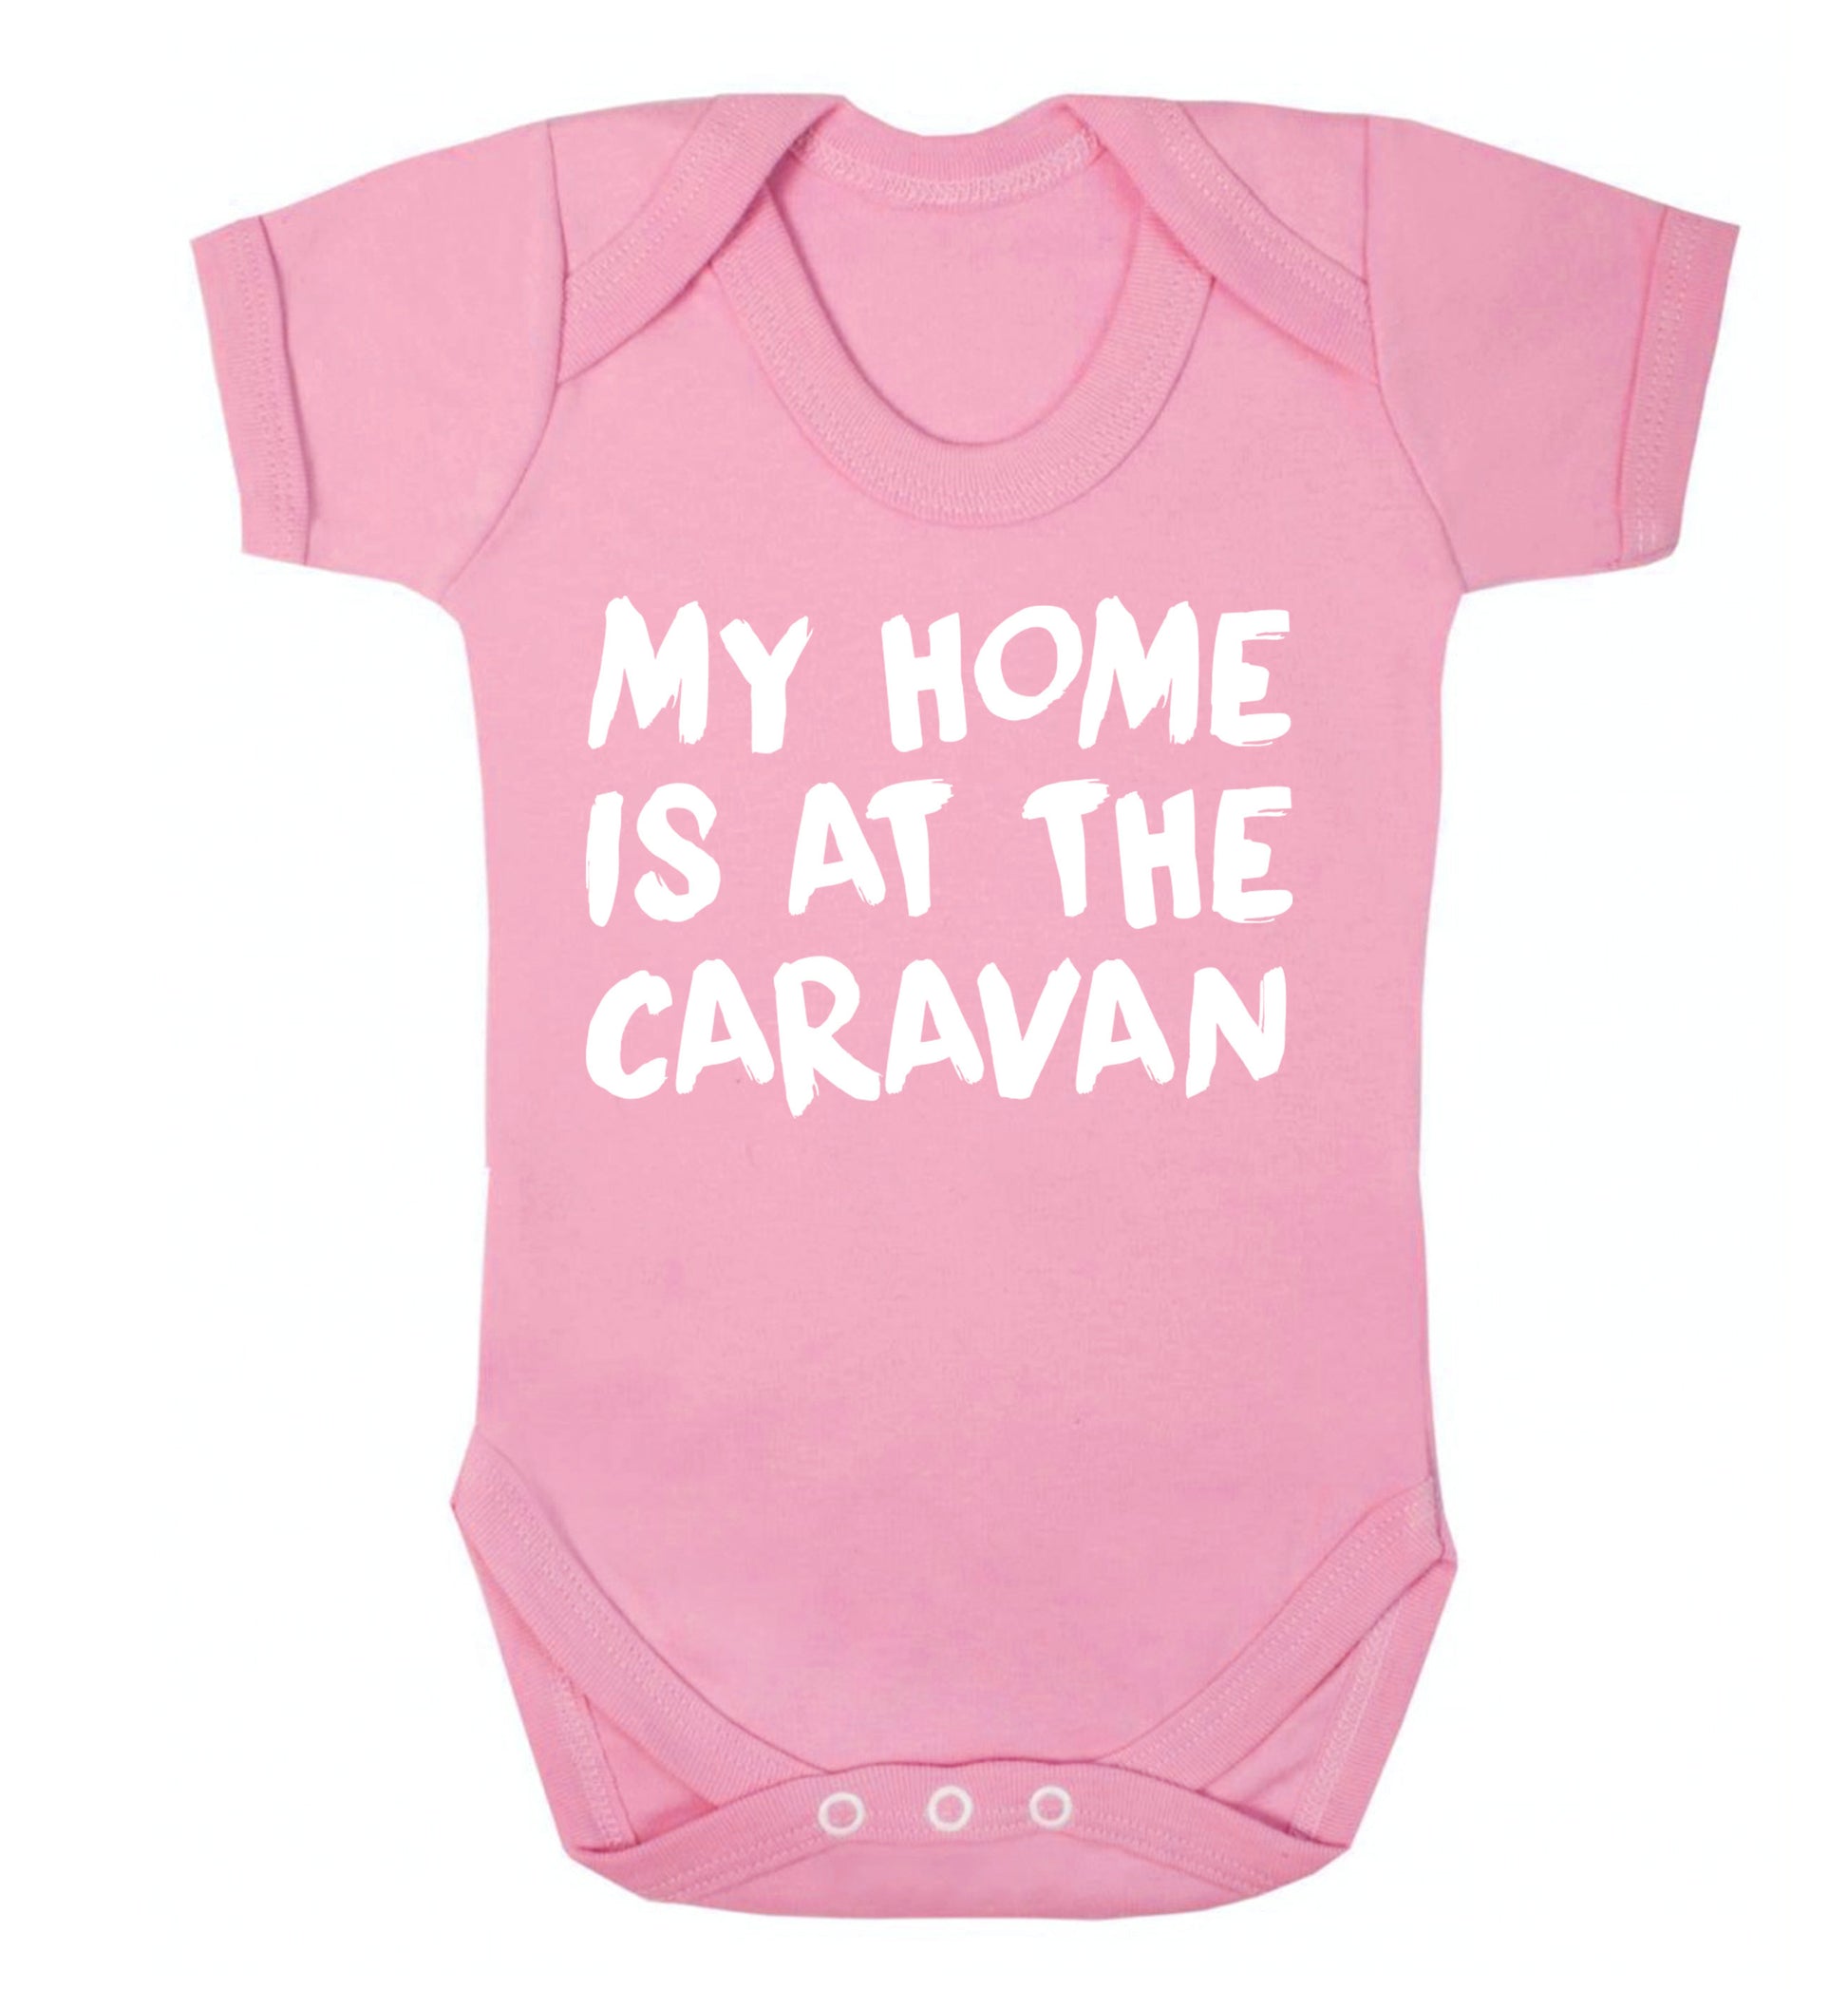 My home is at the caravan Baby Vest pale pink 18-24 months